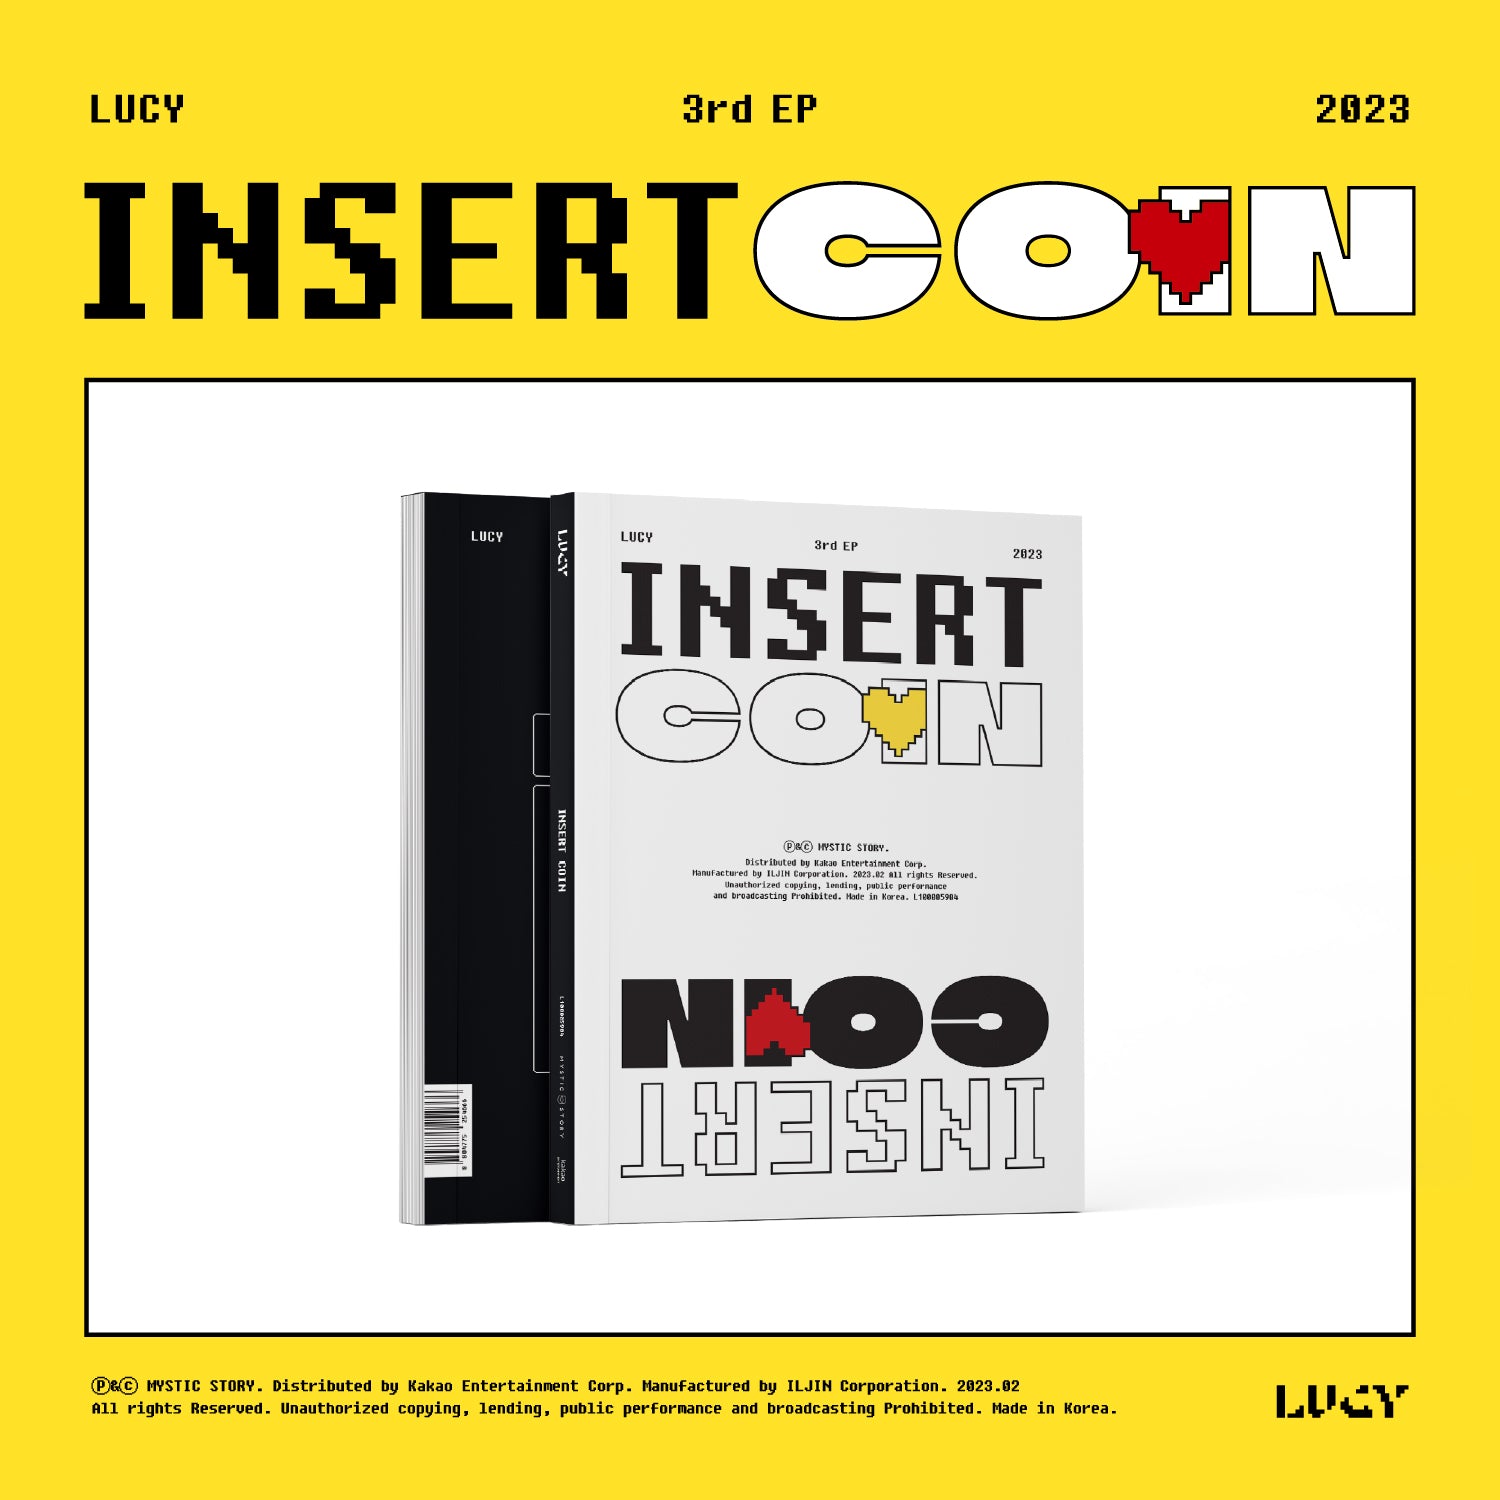 LUCY 3RD EP ALBUM 'INSERT COIN' COVER